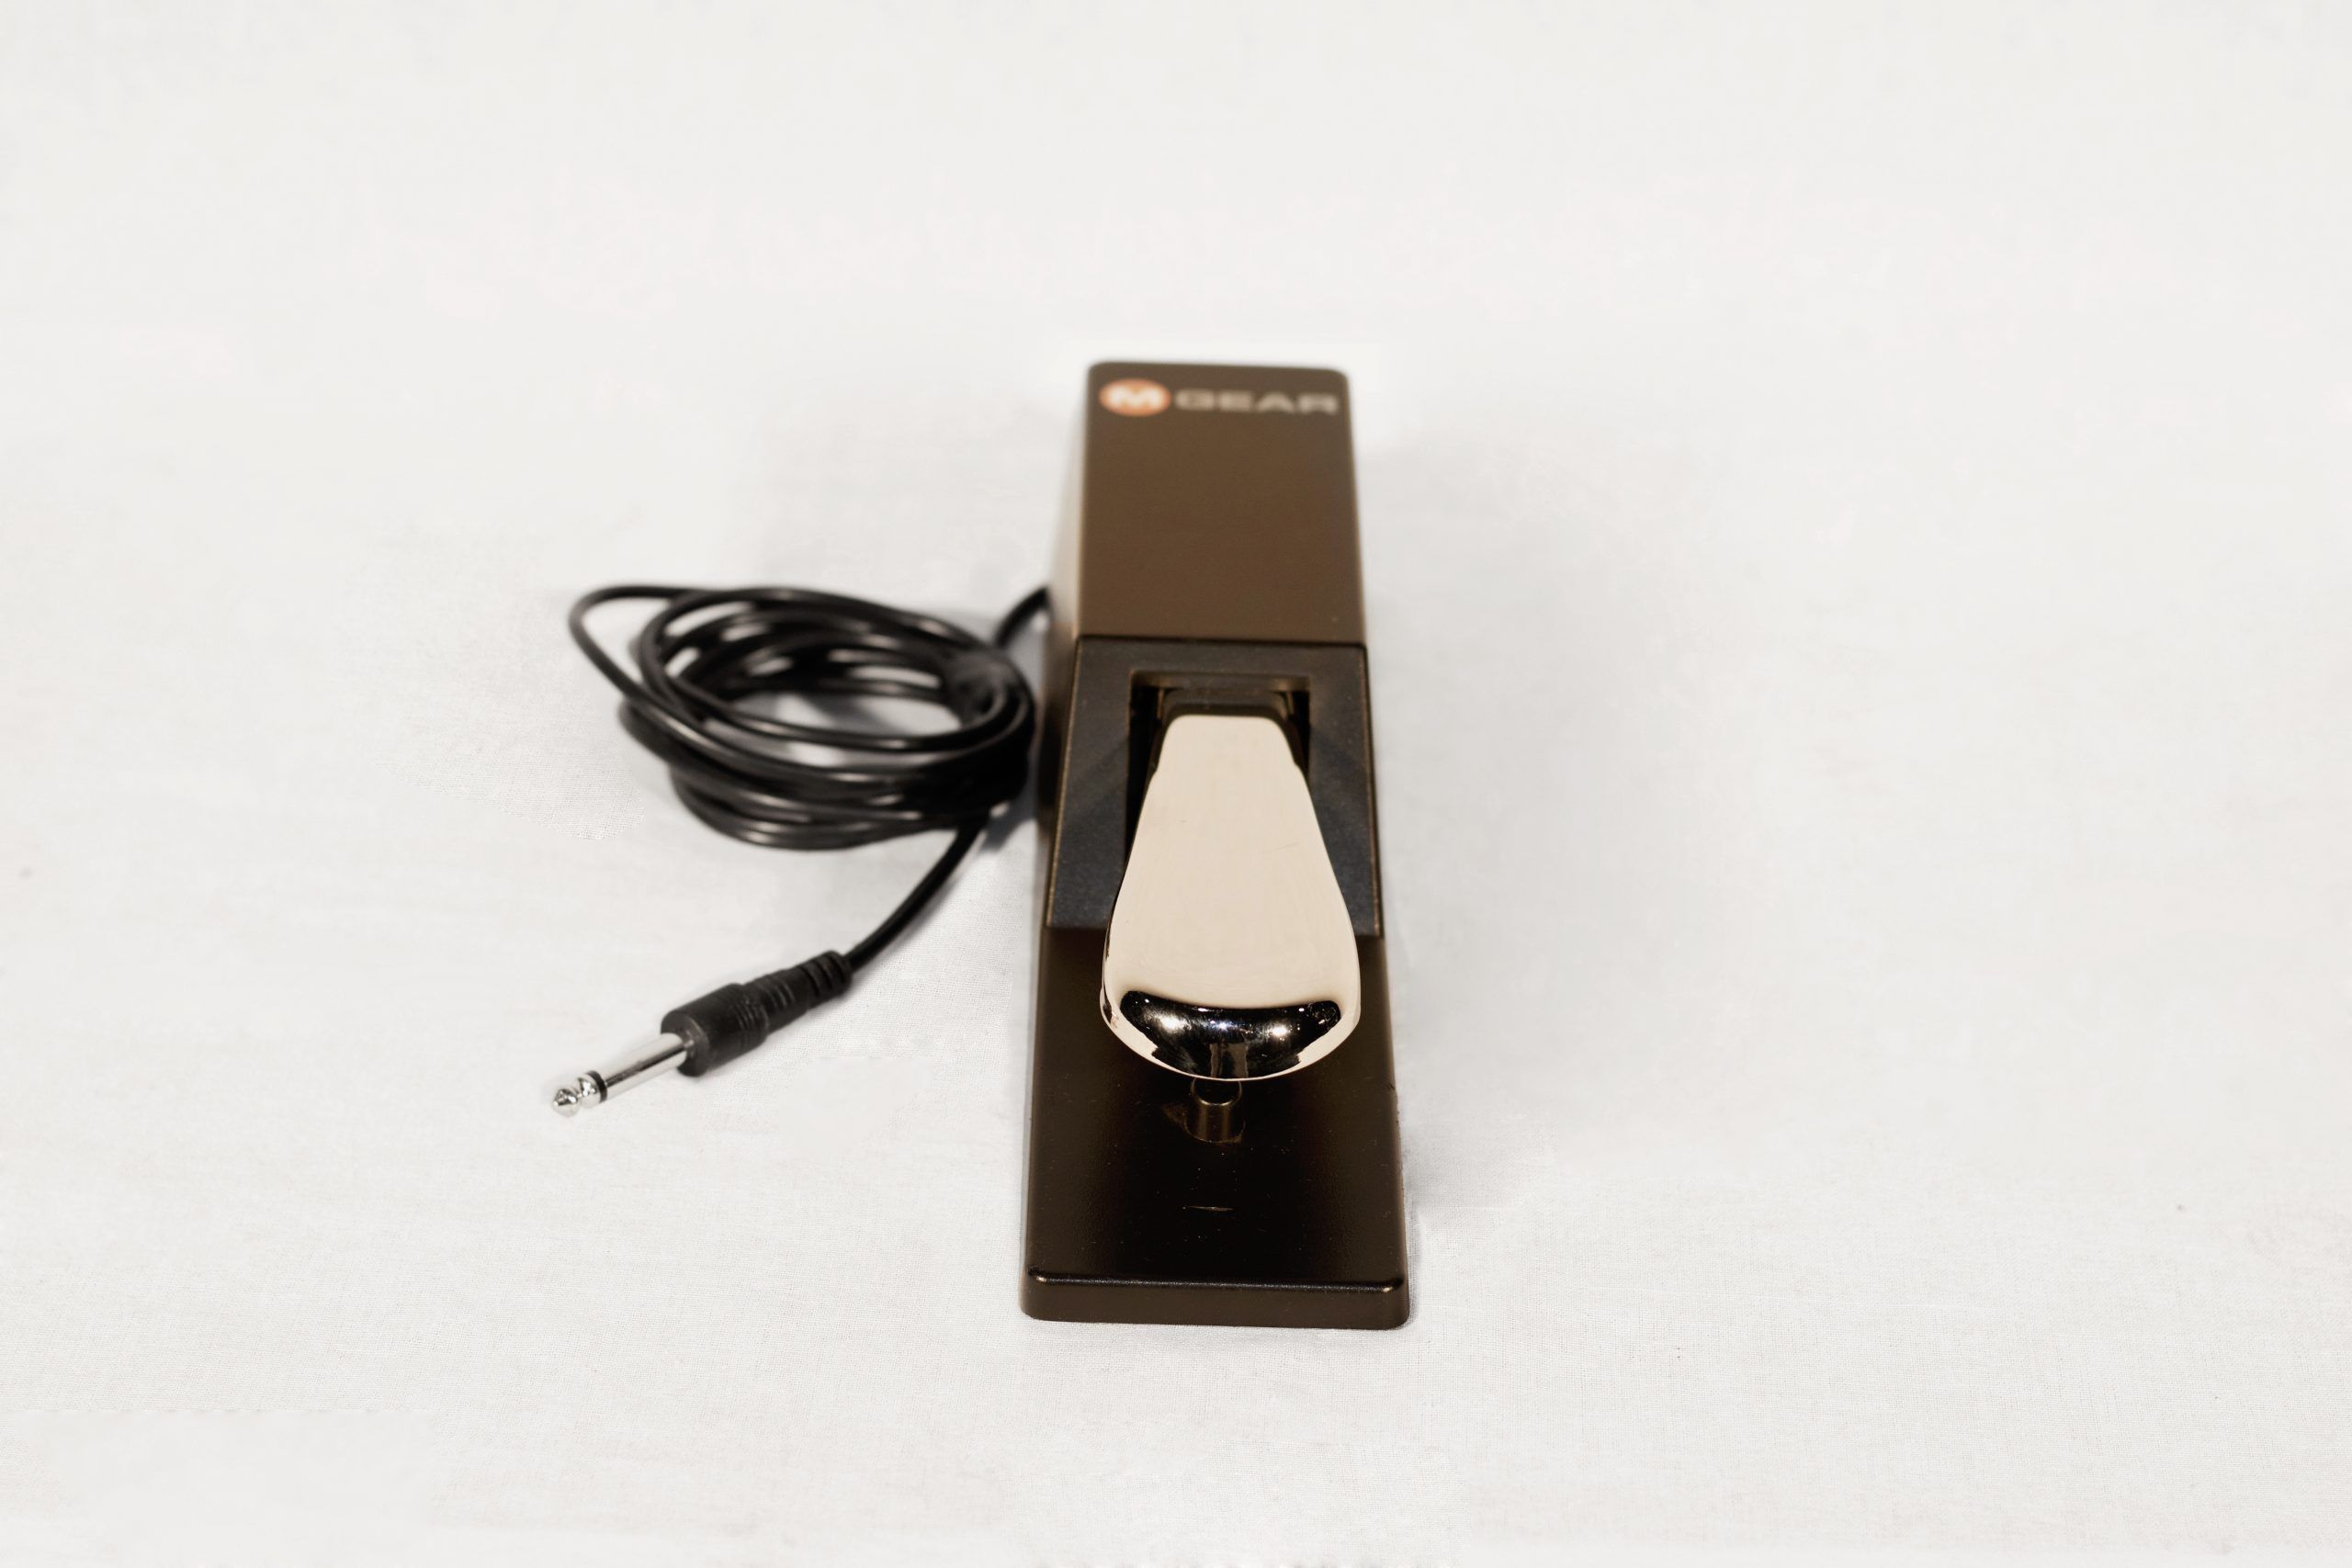 USED M-Audio SP-2 Sustain Pedal - admin ajax.php?action=kernel&p=image&src=%7B%22file%22%3A%22wp content%2Fuploads%2F2020%2F05%2FMAudio SP2 1 1 scaled